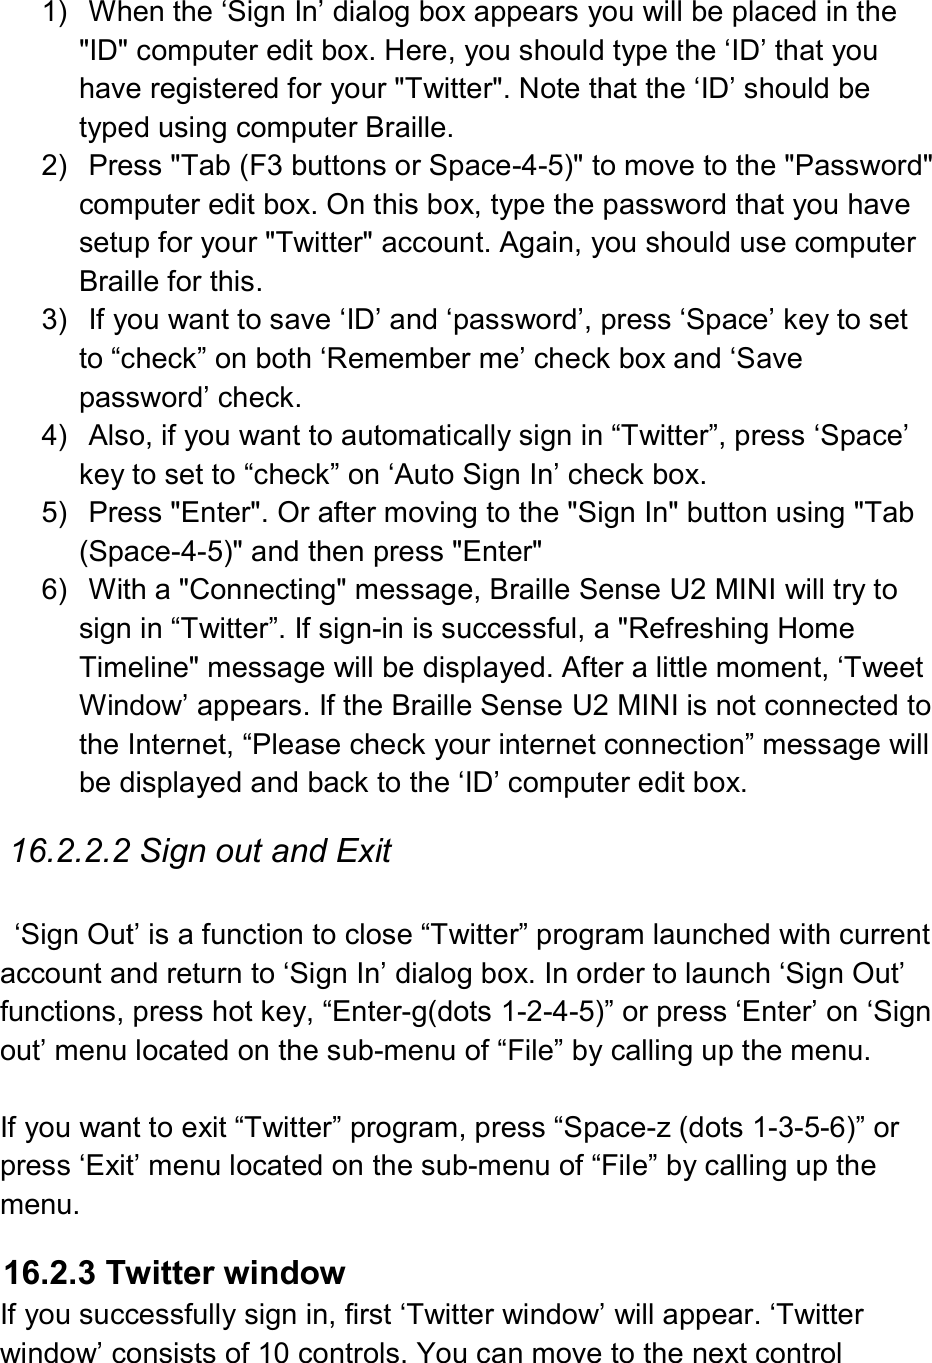  1)  When the ‘Sign In’ dialog box appears you will be placed in the &quot;ID&quot; computer edit box. Here, you should type the ‘ID’ that you have registered for your &quot;Twitter&quot;. Note that the ‘ID’ should be typed using computer Braille. 2)  Press &quot;Tab (F3 buttons or Space-4-5)&quot; to move to the &quot;Password&quot; computer edit box. On this box, type the password that you have setup for your &quot;Twitter&quot; account. Again, you should use computer Braille for this.   3)  If you want to save ‘ID’ and ‘password’, press ‘Space’ key to set to “check” on both ‘Remember me’ check box and ‘Save password’ check. 4)  Also, if you want to automatically sign in “Twitter”, press ‘Space’ key to set to “check” on ‘Auto Sign In’ check box.   5)  Press &quot;Enter&quot;. Or after moving to the &quot;Sign In&quot; button using &quot;Tab (Space-4-5)&quot; and then press &quot;Enter&quot; 6)  With a &quot;Connecting&quot; message, Braille Sense U2 MINI will try to sign in “Twitter”. If sign-in is successful, a &quot;Refreshing Home Timeline&quot; message will be displayed. After a little moment, ‘Tweet Window’ appears. If the Braille Sense U2 MINI is not connected to the Internet, “Please check your internet connection” message will be displayed and back to the ‘ID’ computer edit box.  16.2.2.2 Sign out and Exit    ‘Sign Out’ is a function to close “Twitter” program launched with current account and return to ‘Sign In’ dialog box. In order to launch ‘Sign Out’ functions, press hot key, “Enter-g(dots 1-2-4-5)” or press ‘Enter’ on ‘Sign out’ menu located on the sub-menu of “File” by calling up the menu.    If you want to exit “Twitter” program, press “Space-z (dots 1-3-5-6)” or press ‘Exit’ menu located on the sub-menu of “File” by calling up the menu.  16.2.3 Twitter window If you successfully sign in, first ‘Twitter window’ will appear. ‘Twitter window’ consists of 10 controls. You can move to the next control 